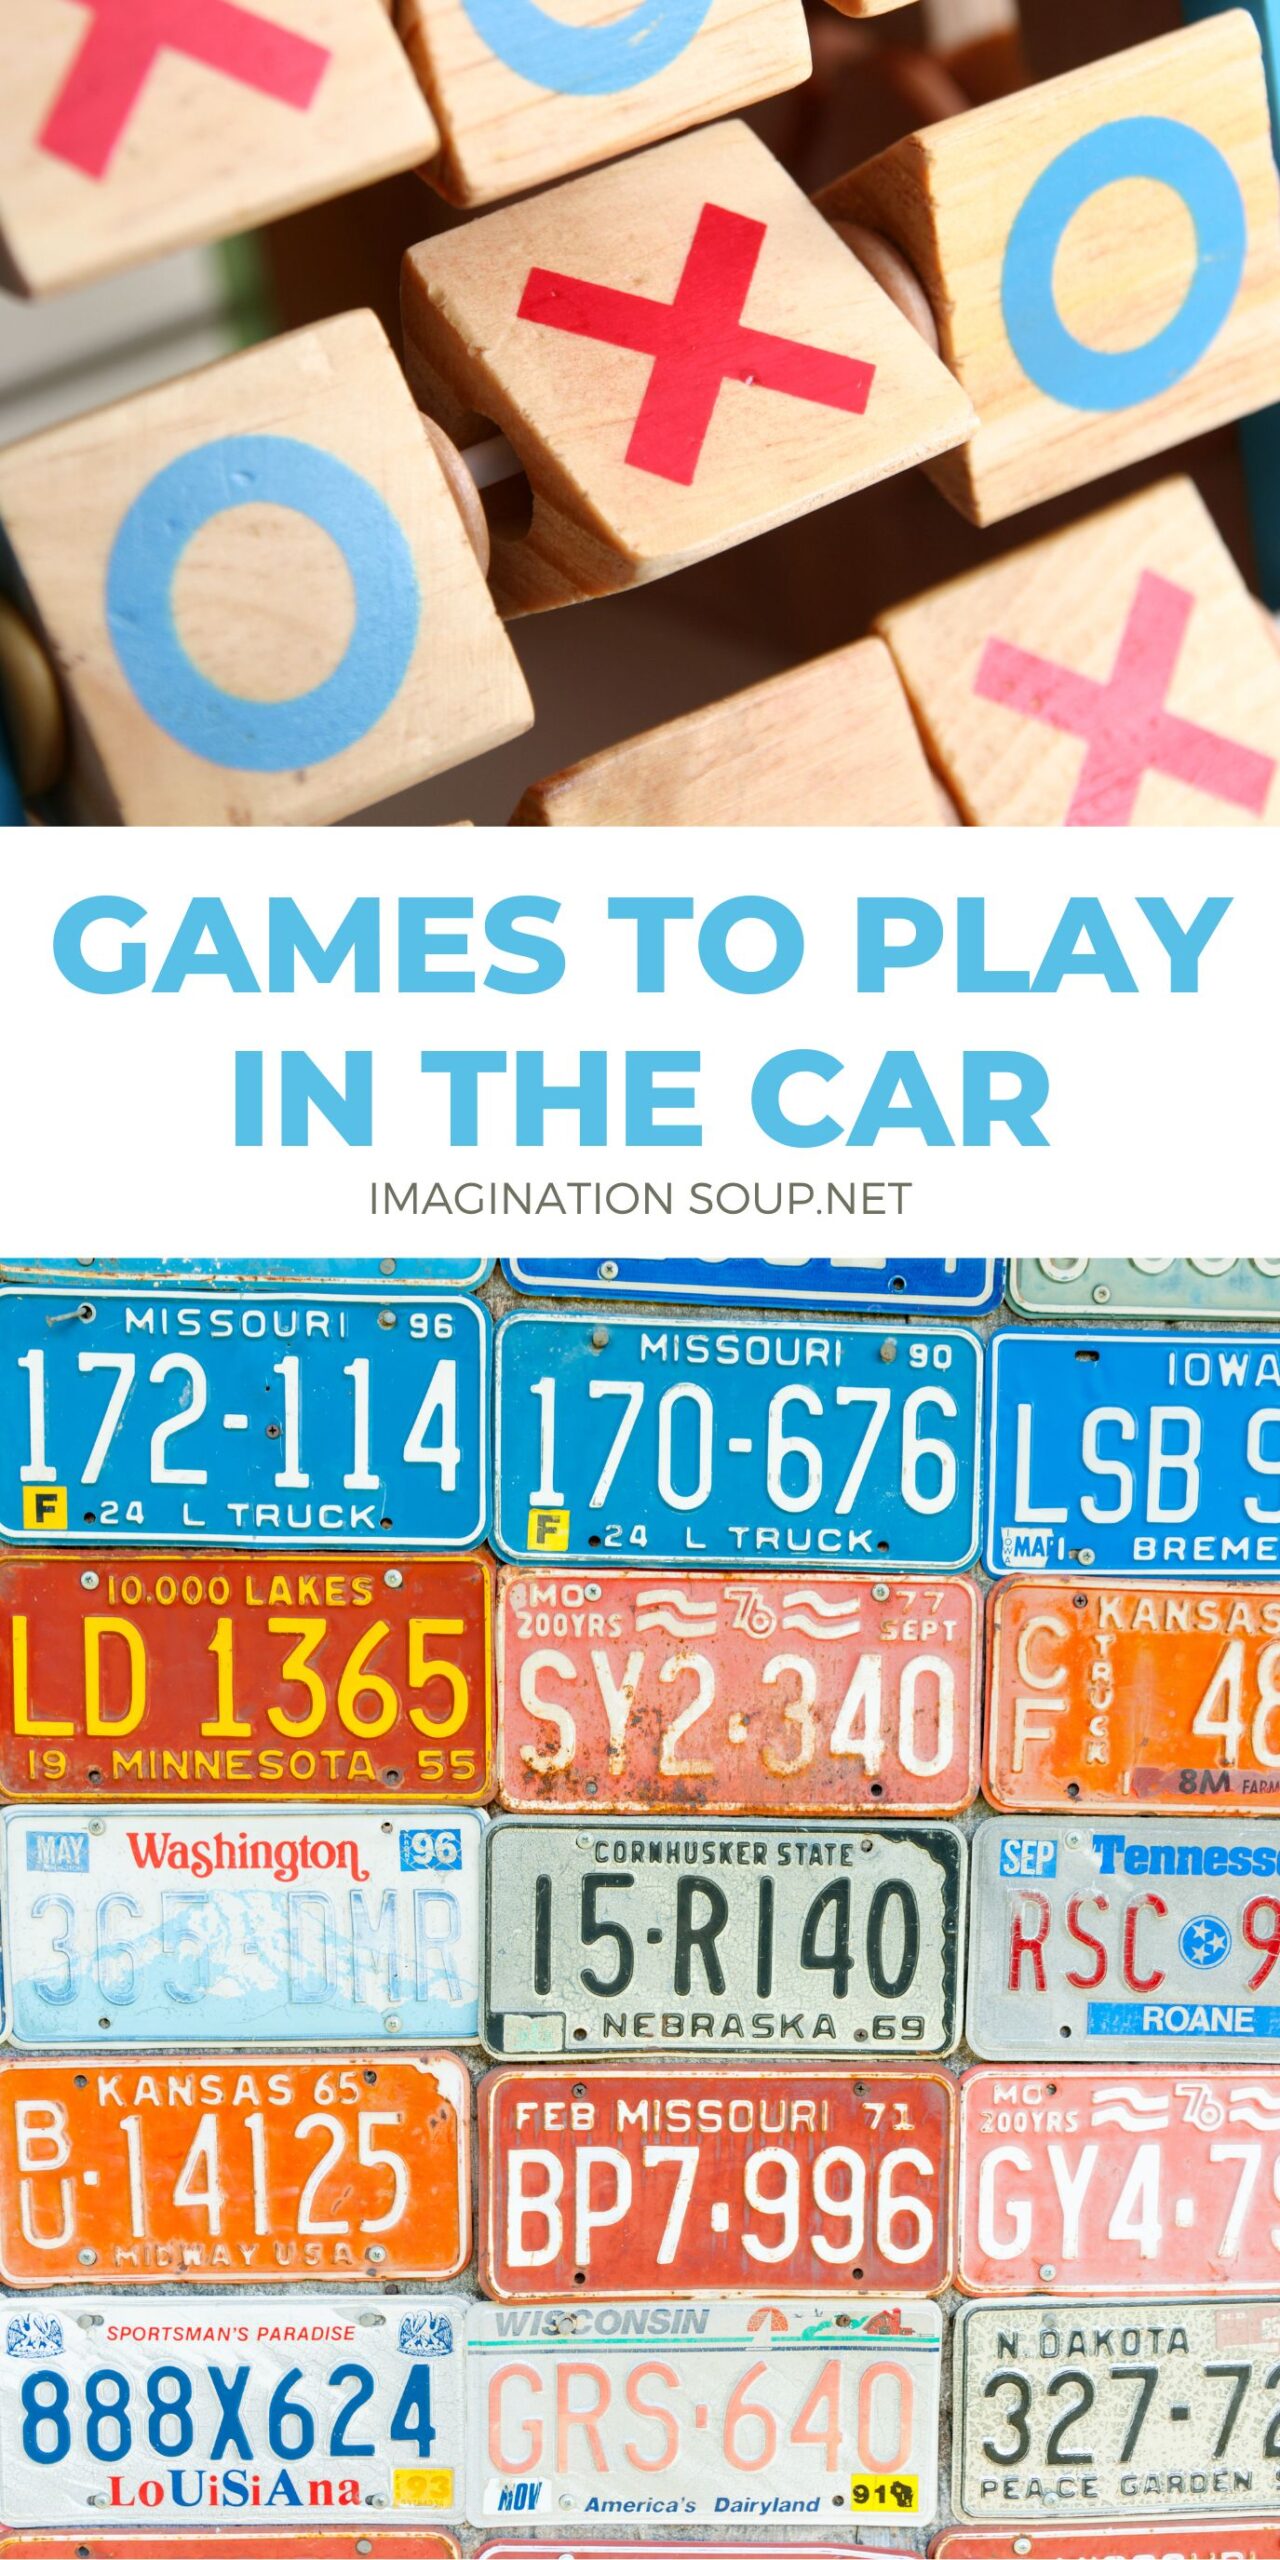 If you drive your kids in the car a lot, you might want to know the best games to play in the car, including paper and pencil games! Whether you're driving on a road trip, going to a restaurant, or taking kids to a sports practice, here are fun games to play in the car!